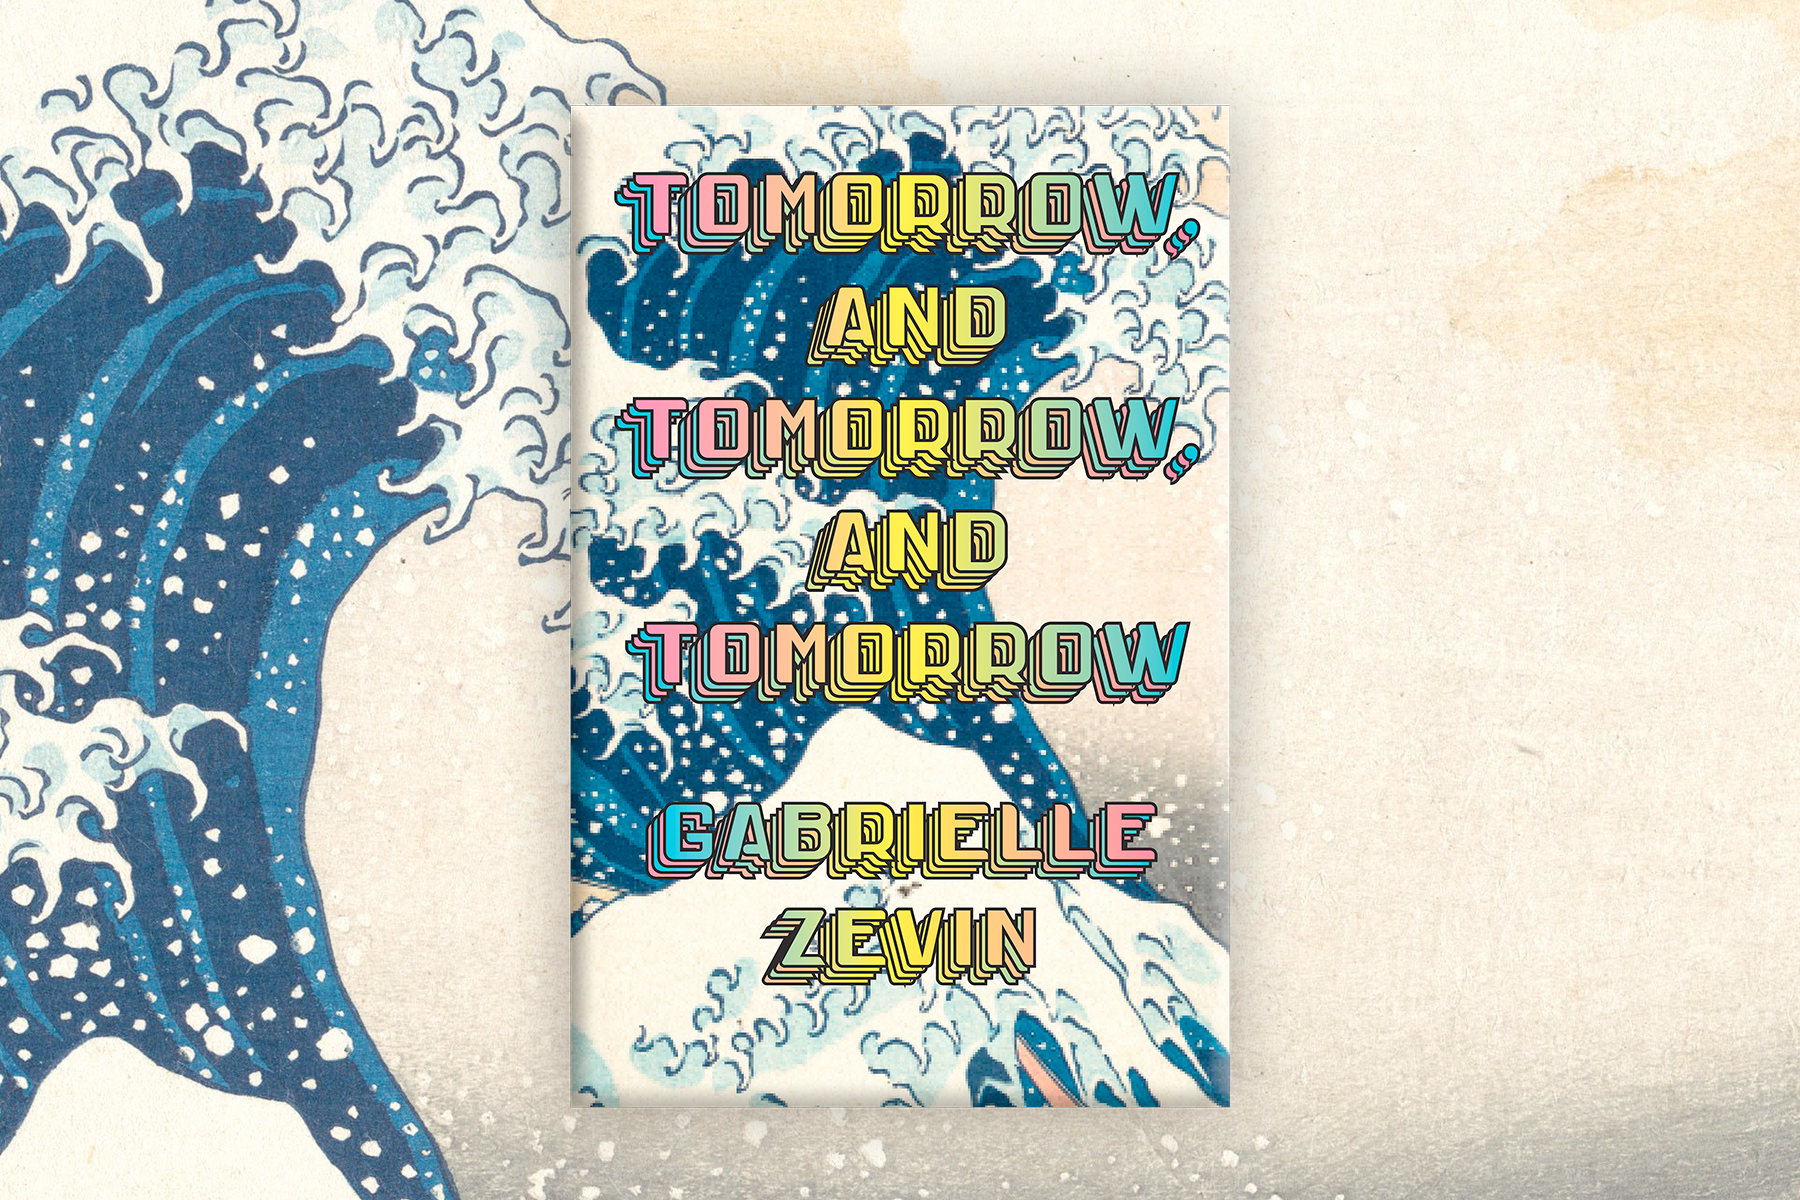 An image of the cover of Tomorrow, and Tomorrow, and Tomorrow by Gabrielle Zevin, with Hokusai's wave, which informs the design, as part of the background